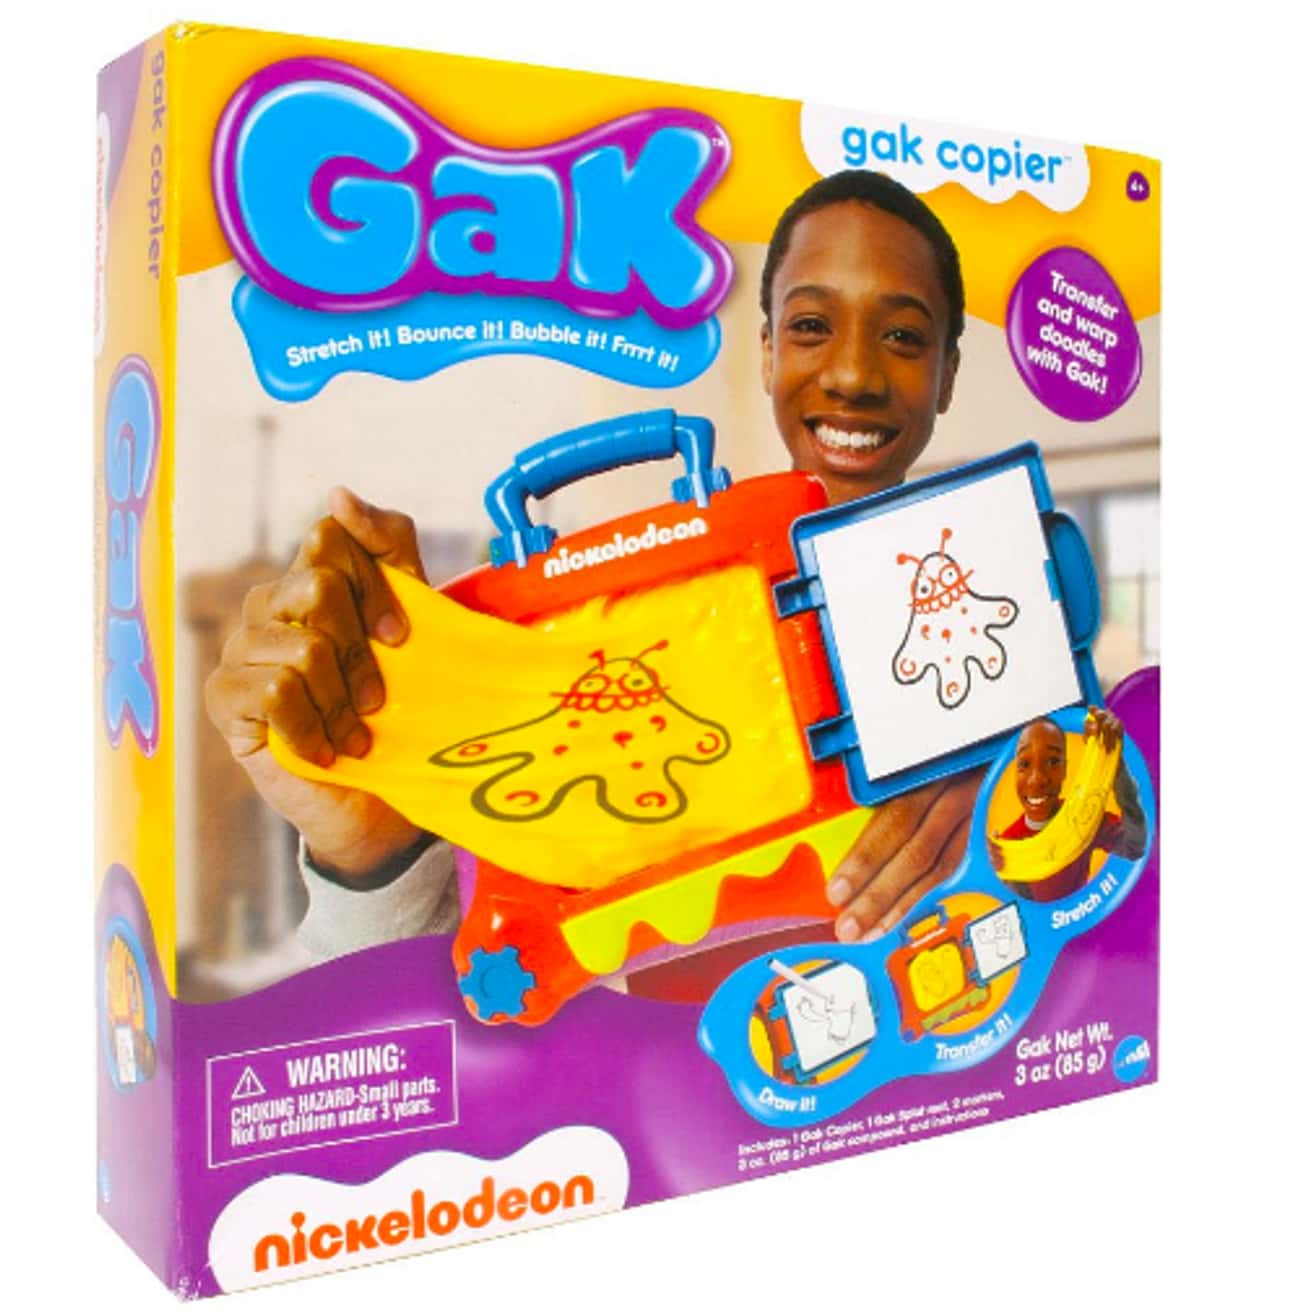 Would You Pay Almost $300 To Make Copies Of Slime? You Might If It's The Nickelodeon Gak Copier